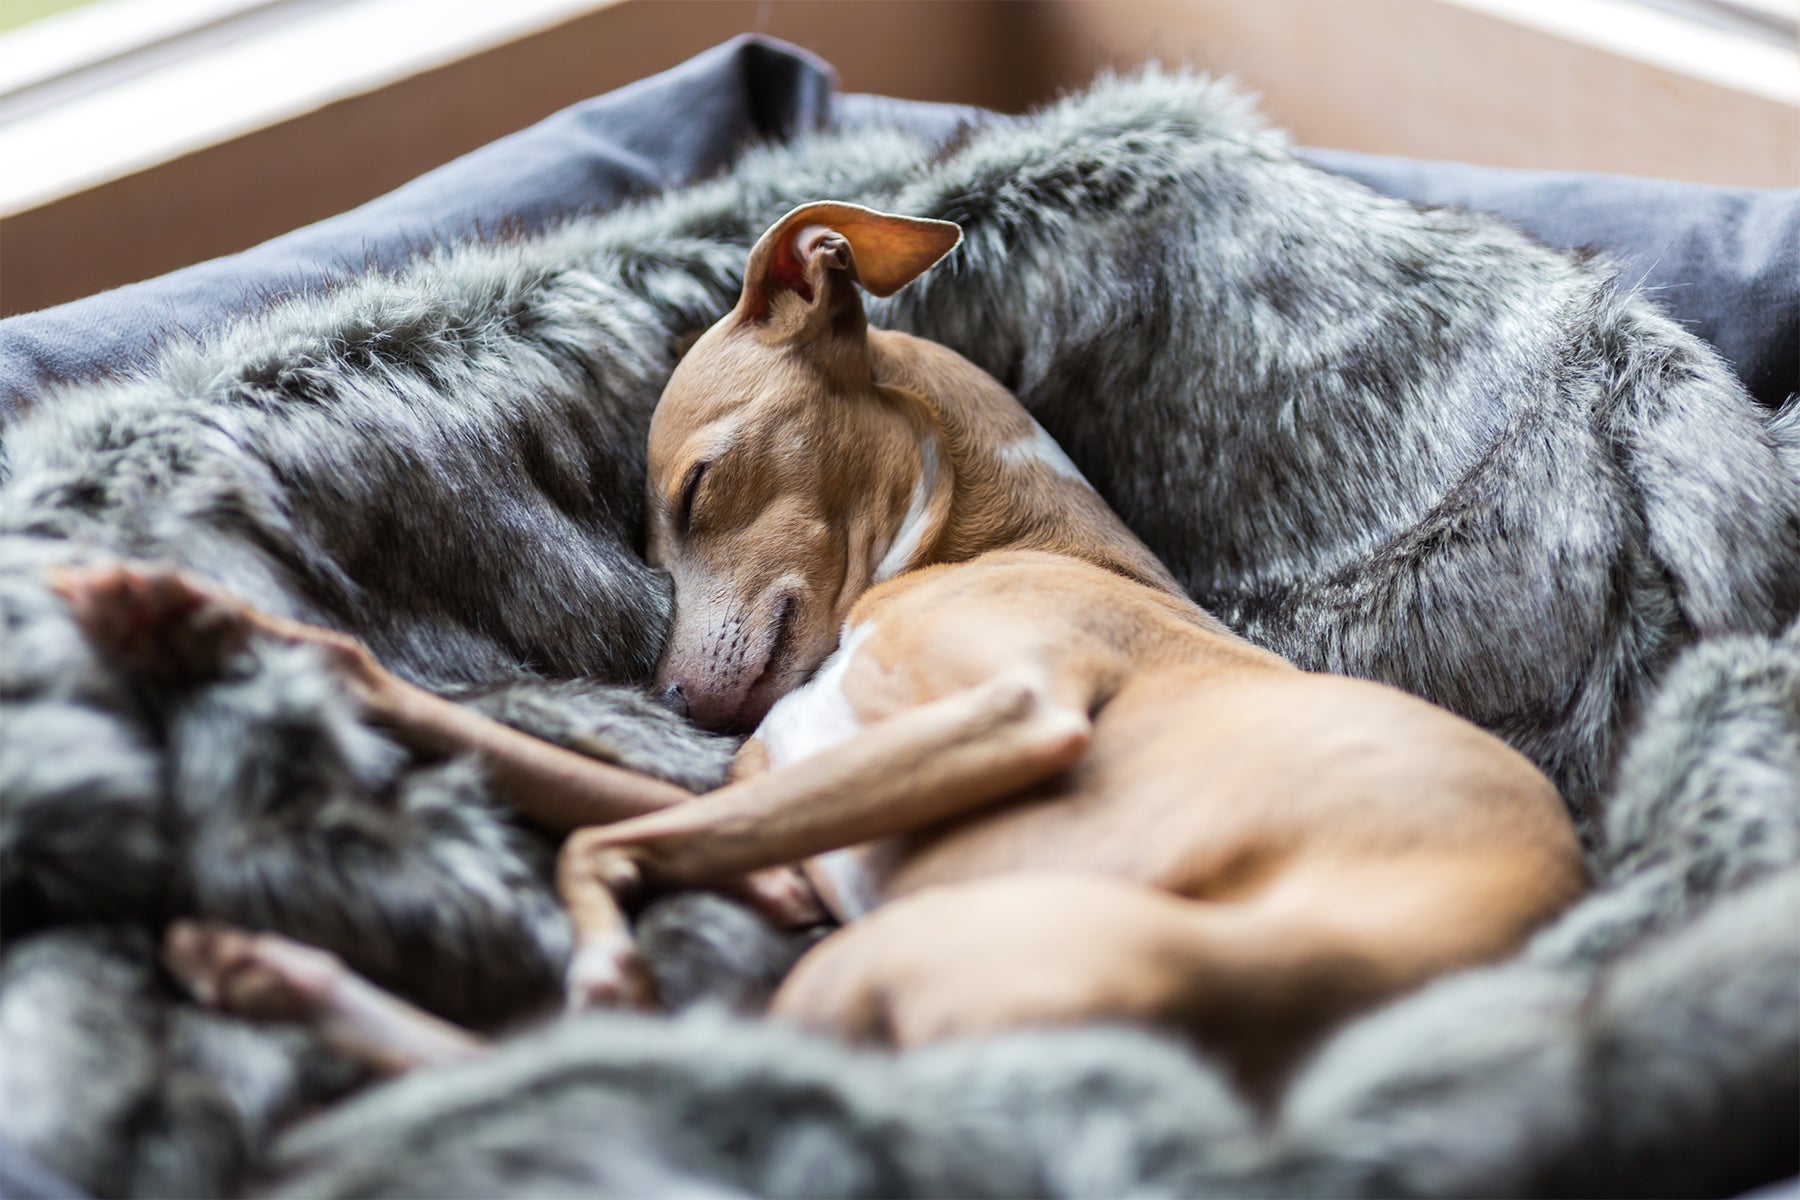 Common dog bedding problems in winter and what to do about them!